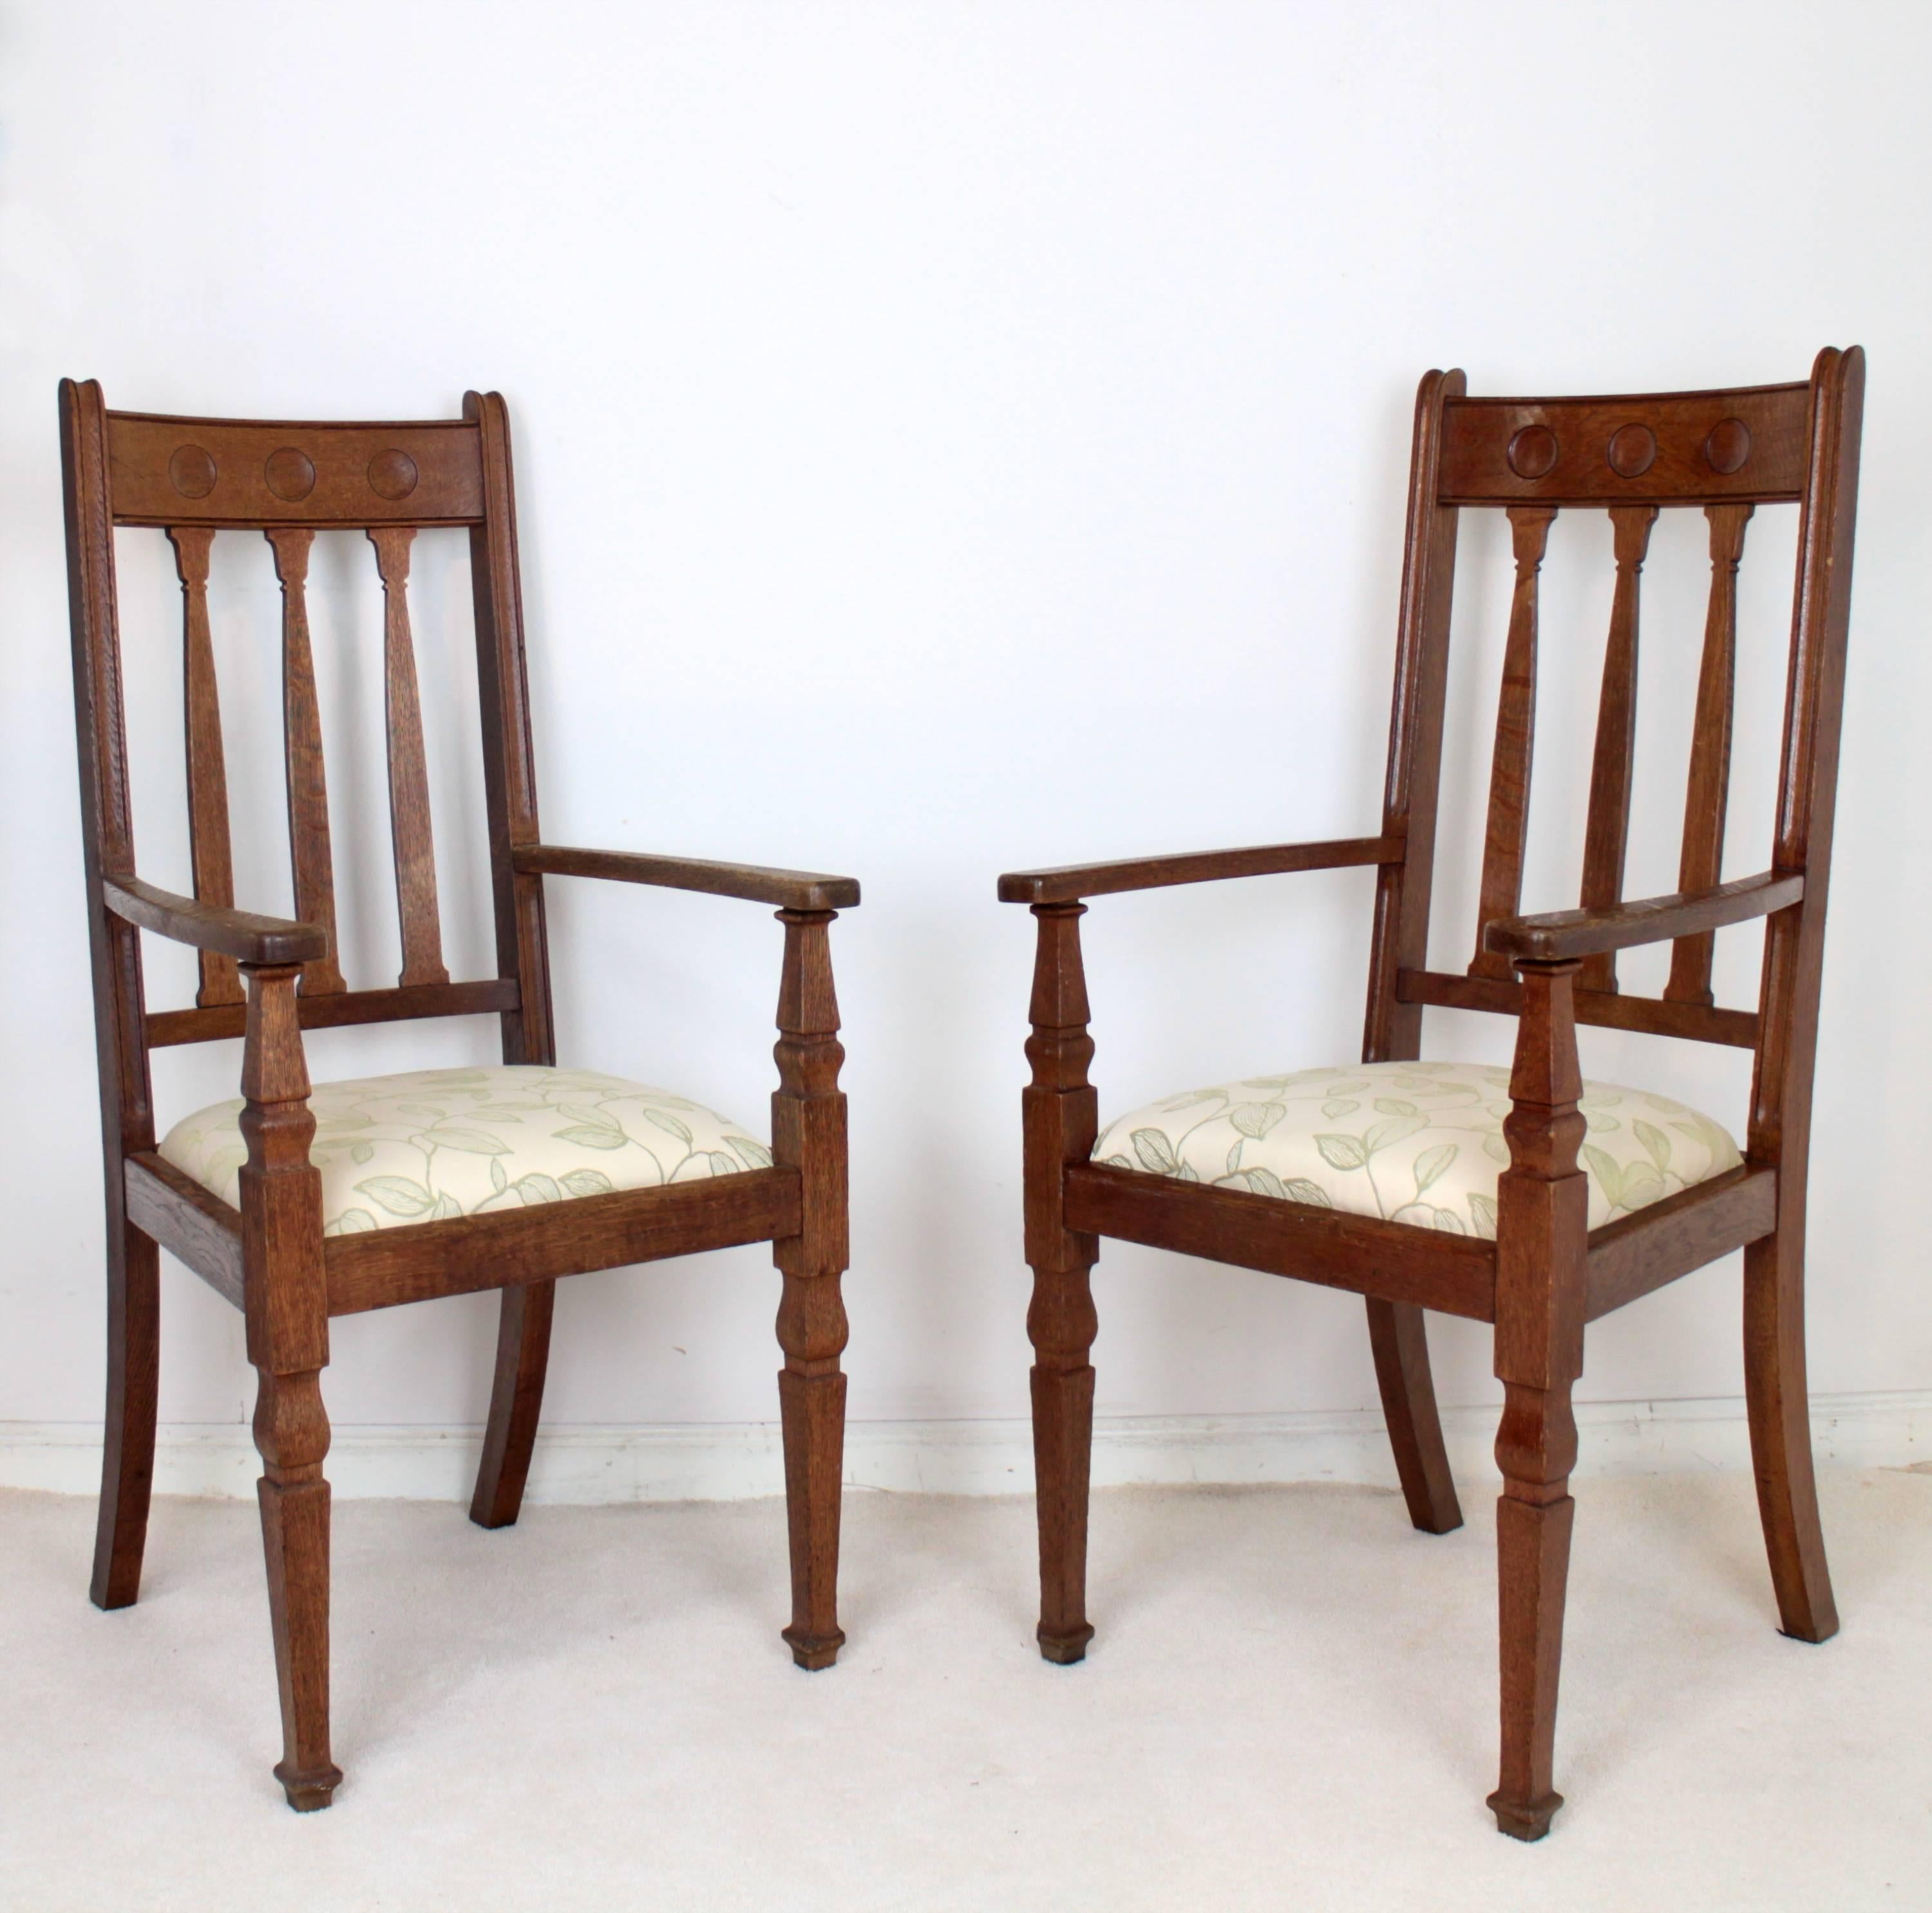 A super pair of Arts & Crafts oak open armchairs by Shapland & Petter of Barnstaple and dating to circa 1910. With three roundels to the toprail and tulip shaped splats beneath, they have wide out-curved armrests and square vase shaped tapering